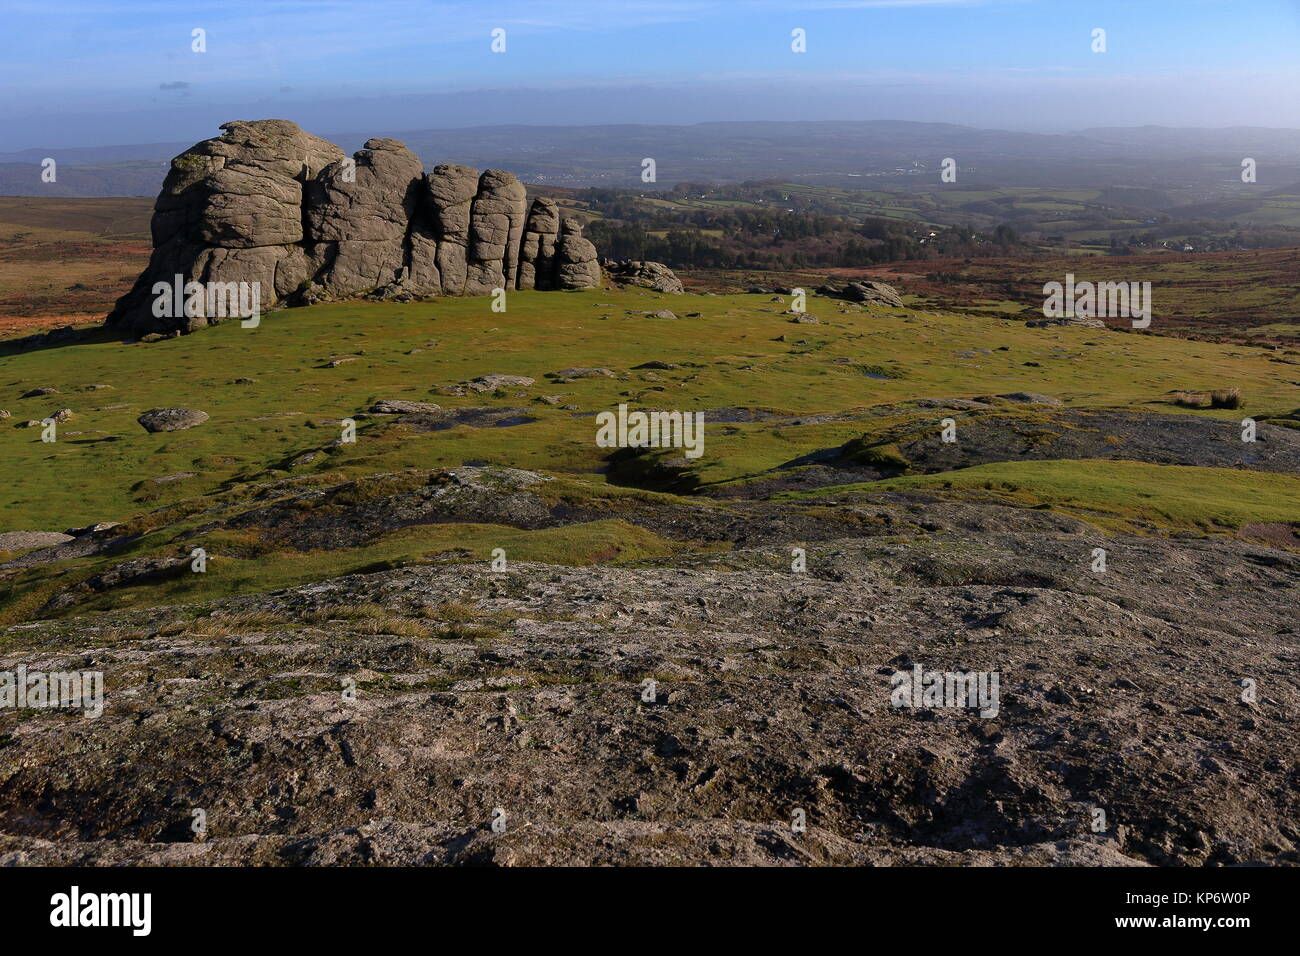 Looking over the granite outcrop of Haytor towards its larger eastern outcrop. Dartmoor National Park, Devon, UK. Dec 2017. Stock Photo